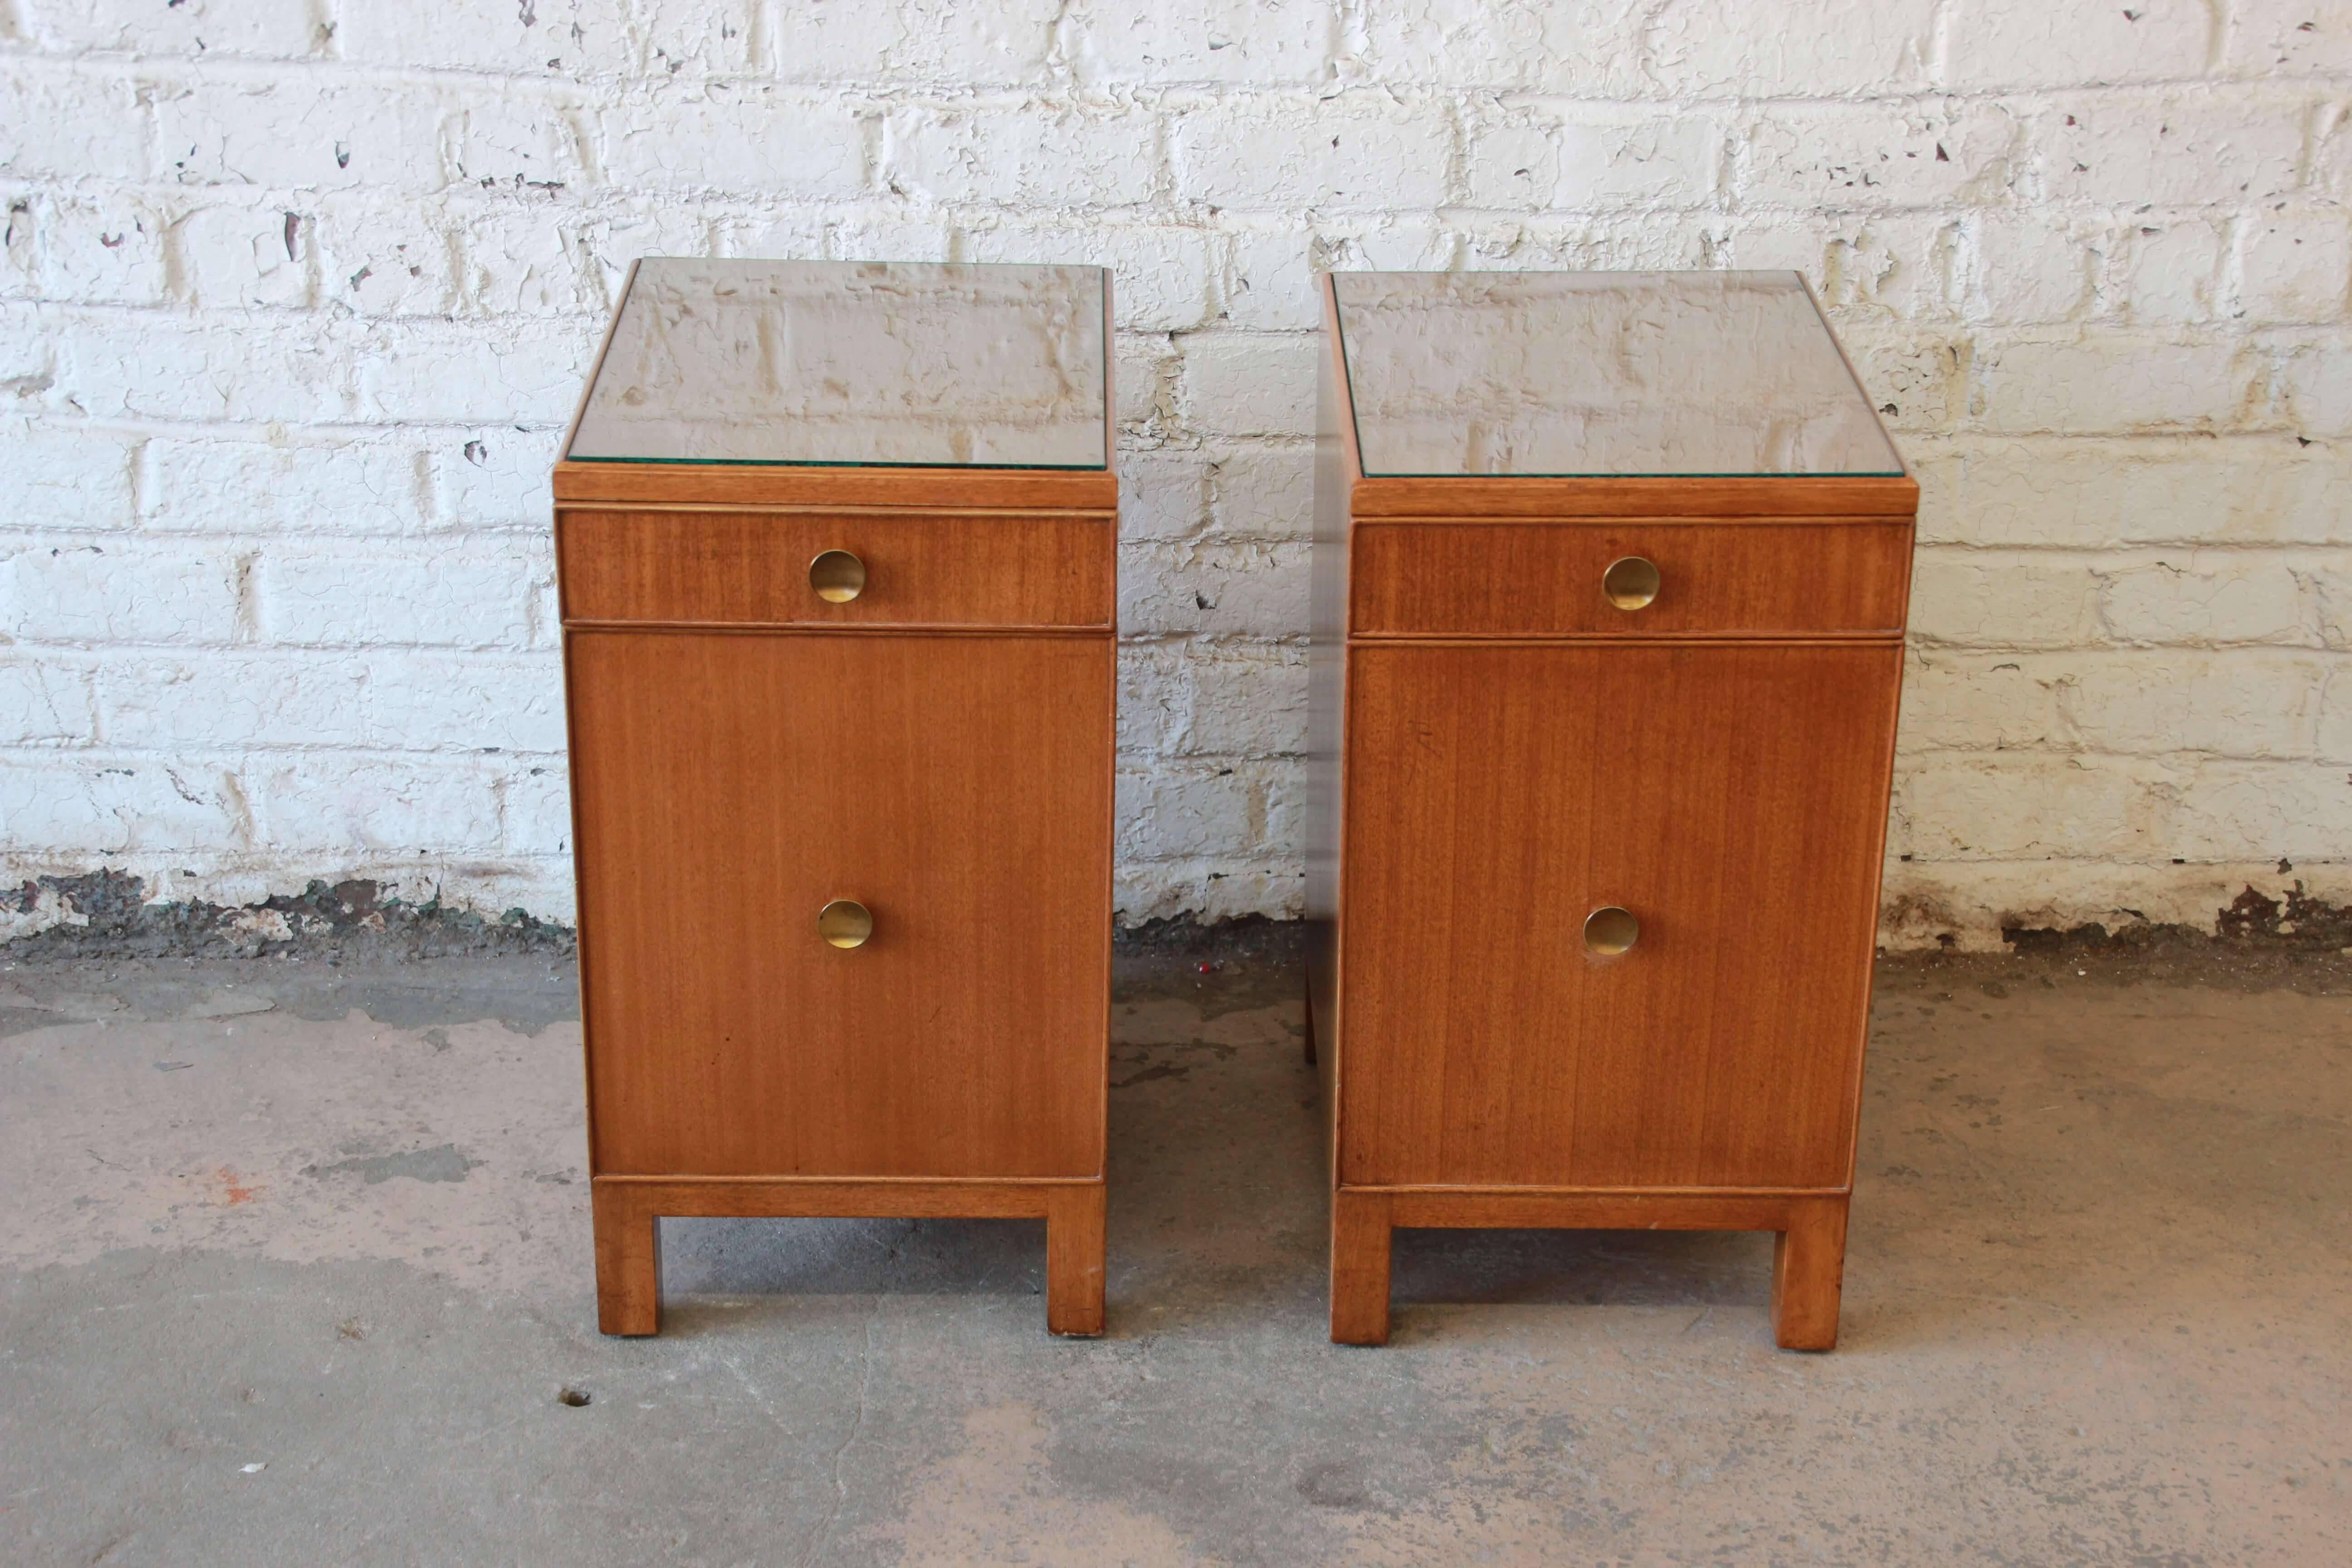 Offering a very nice original condition pair of Dunbar nightstand by Edward Wormley. This set was designed back in 1941 and is in great original condition. The top of the nightstands have inset glass tops which are great attributes for any